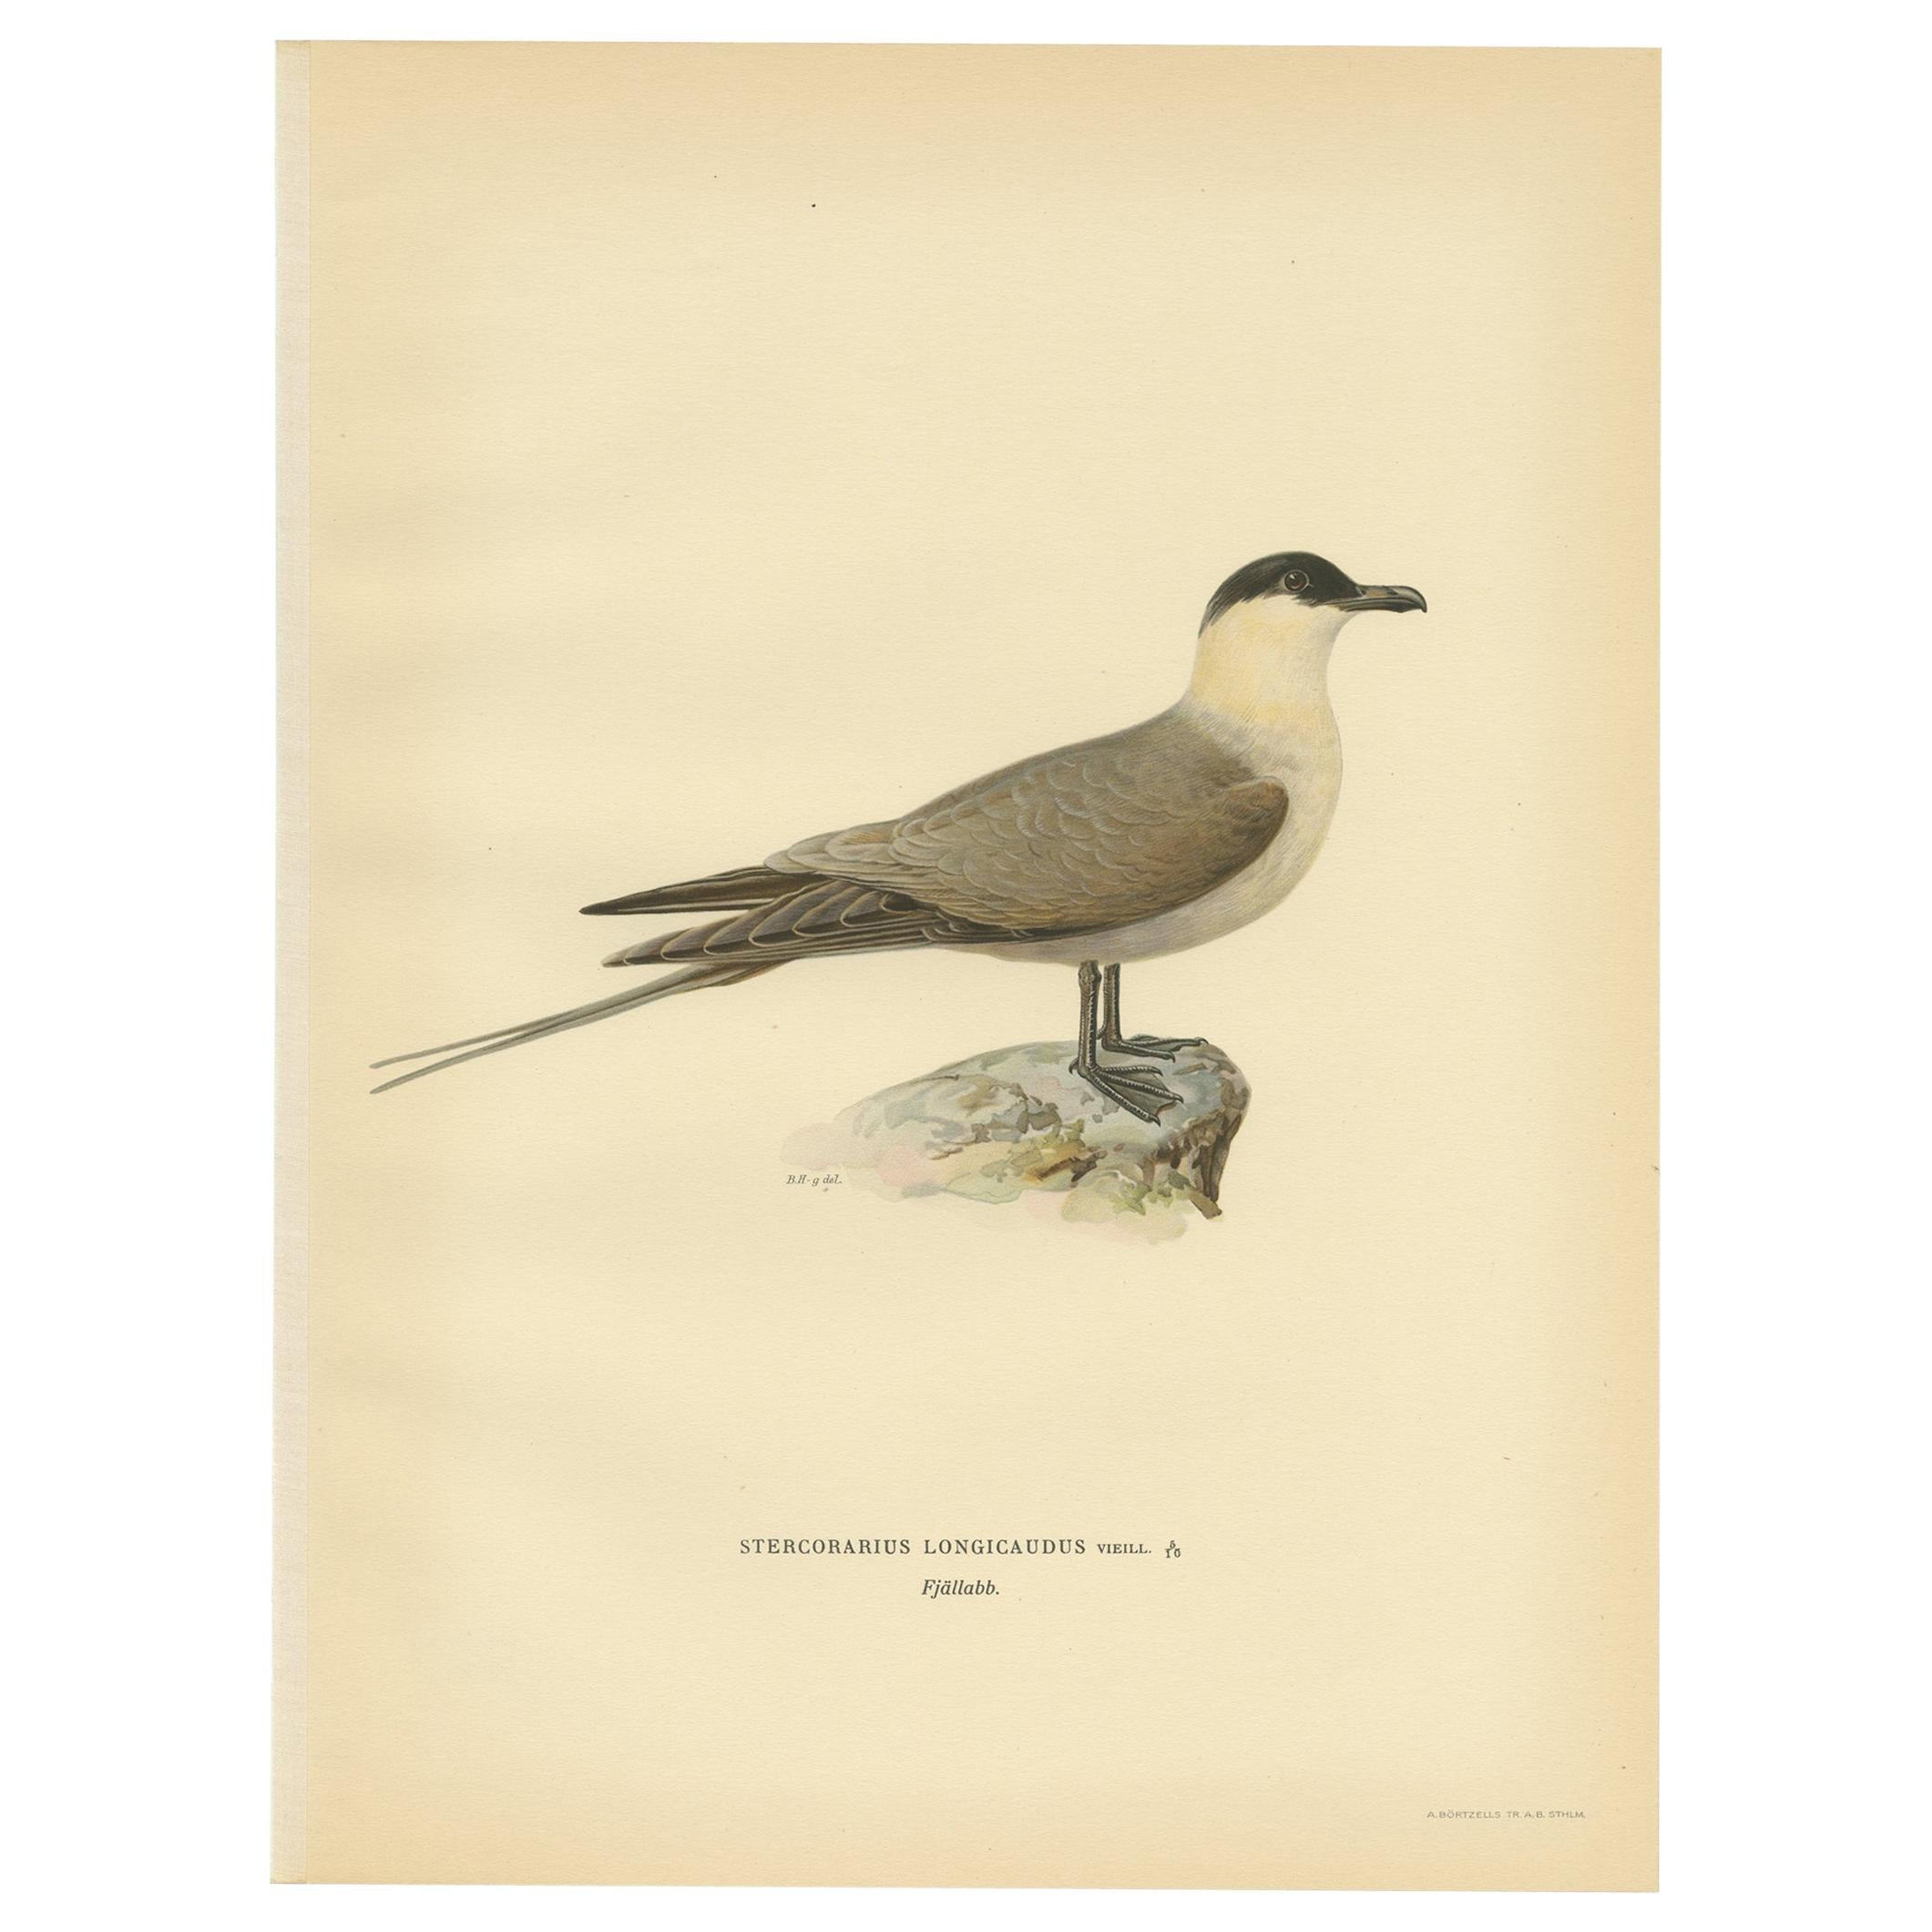 Antique Bird Print of the Long-Tailed Skua by Von Wright, 1929